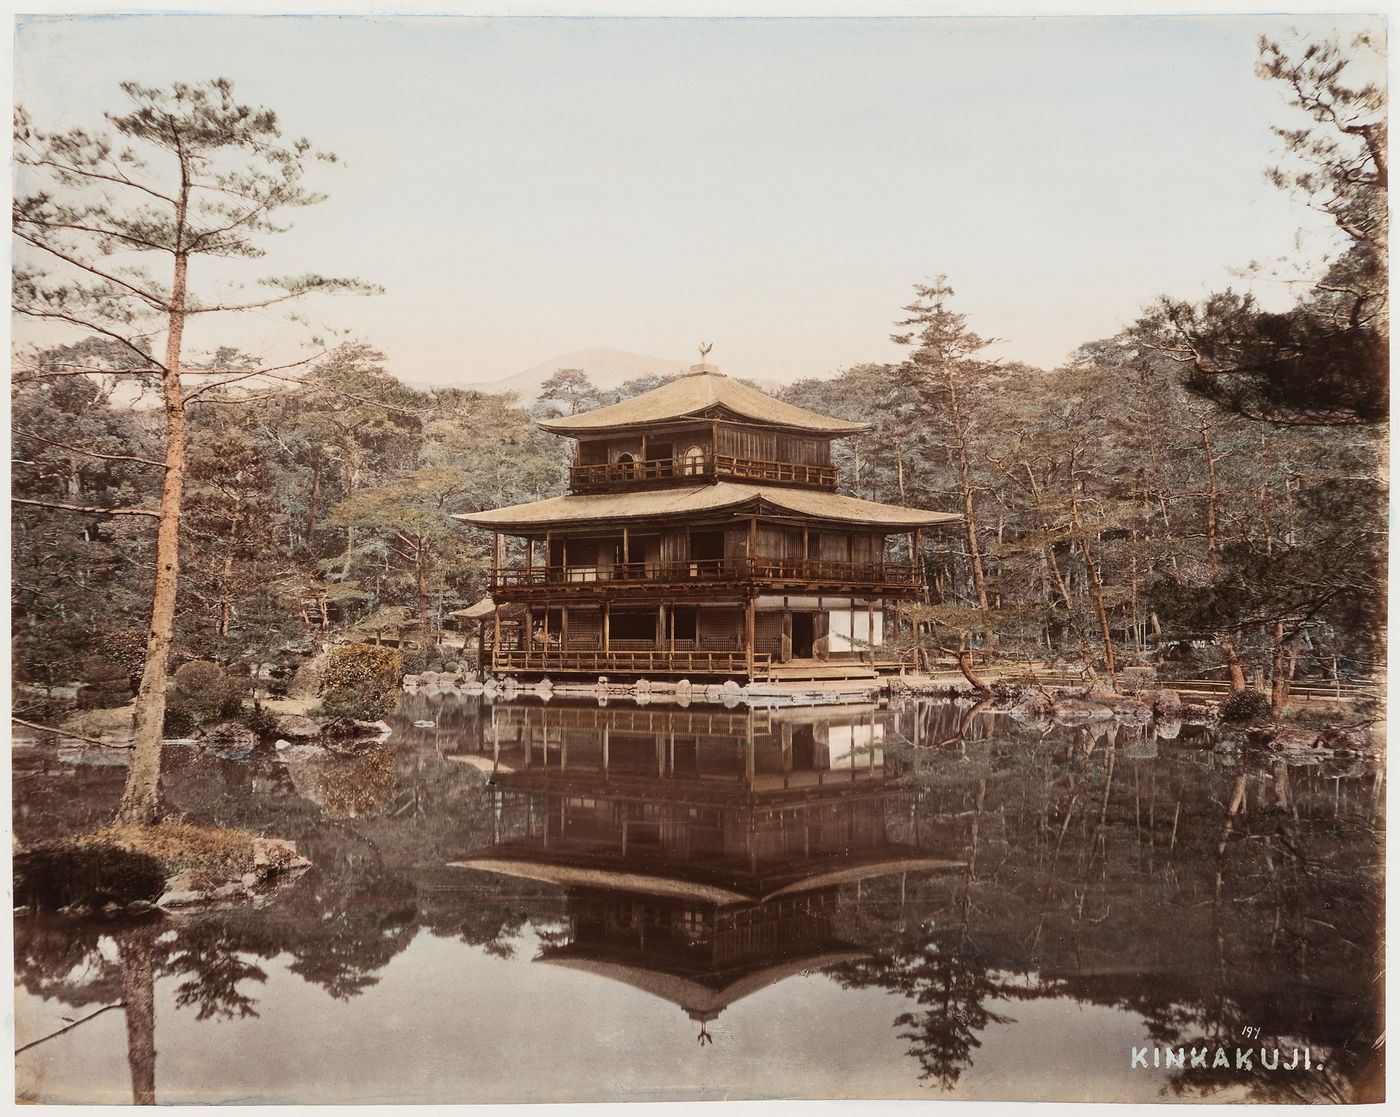 View of Kinkaku (also known as the Golden Pavilion) showing the pond and garden, Kinkakuji (also known as the Temple of the Golden Pavilion and Rokuonji), Kyoto, Japan